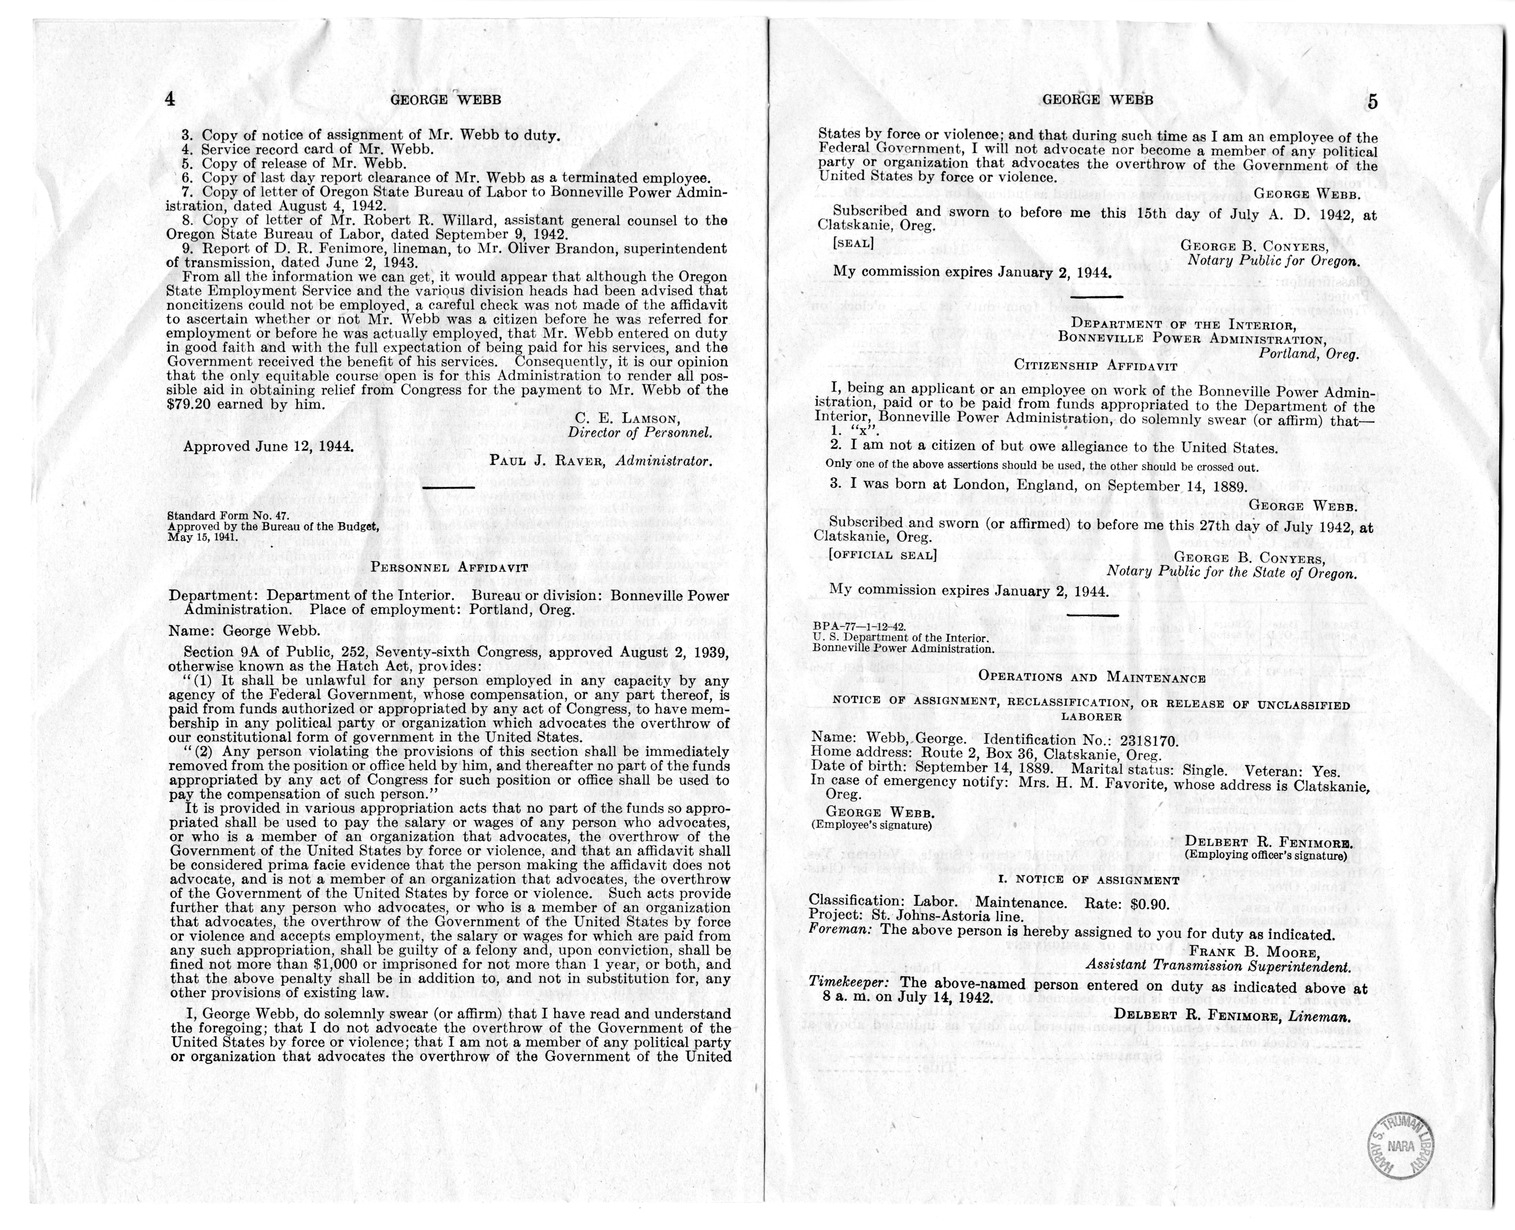 Memorandum from Frederick J. Bailey to M. C. Latta, H.R. 1344, For the Relief of George Webb, with Attachments